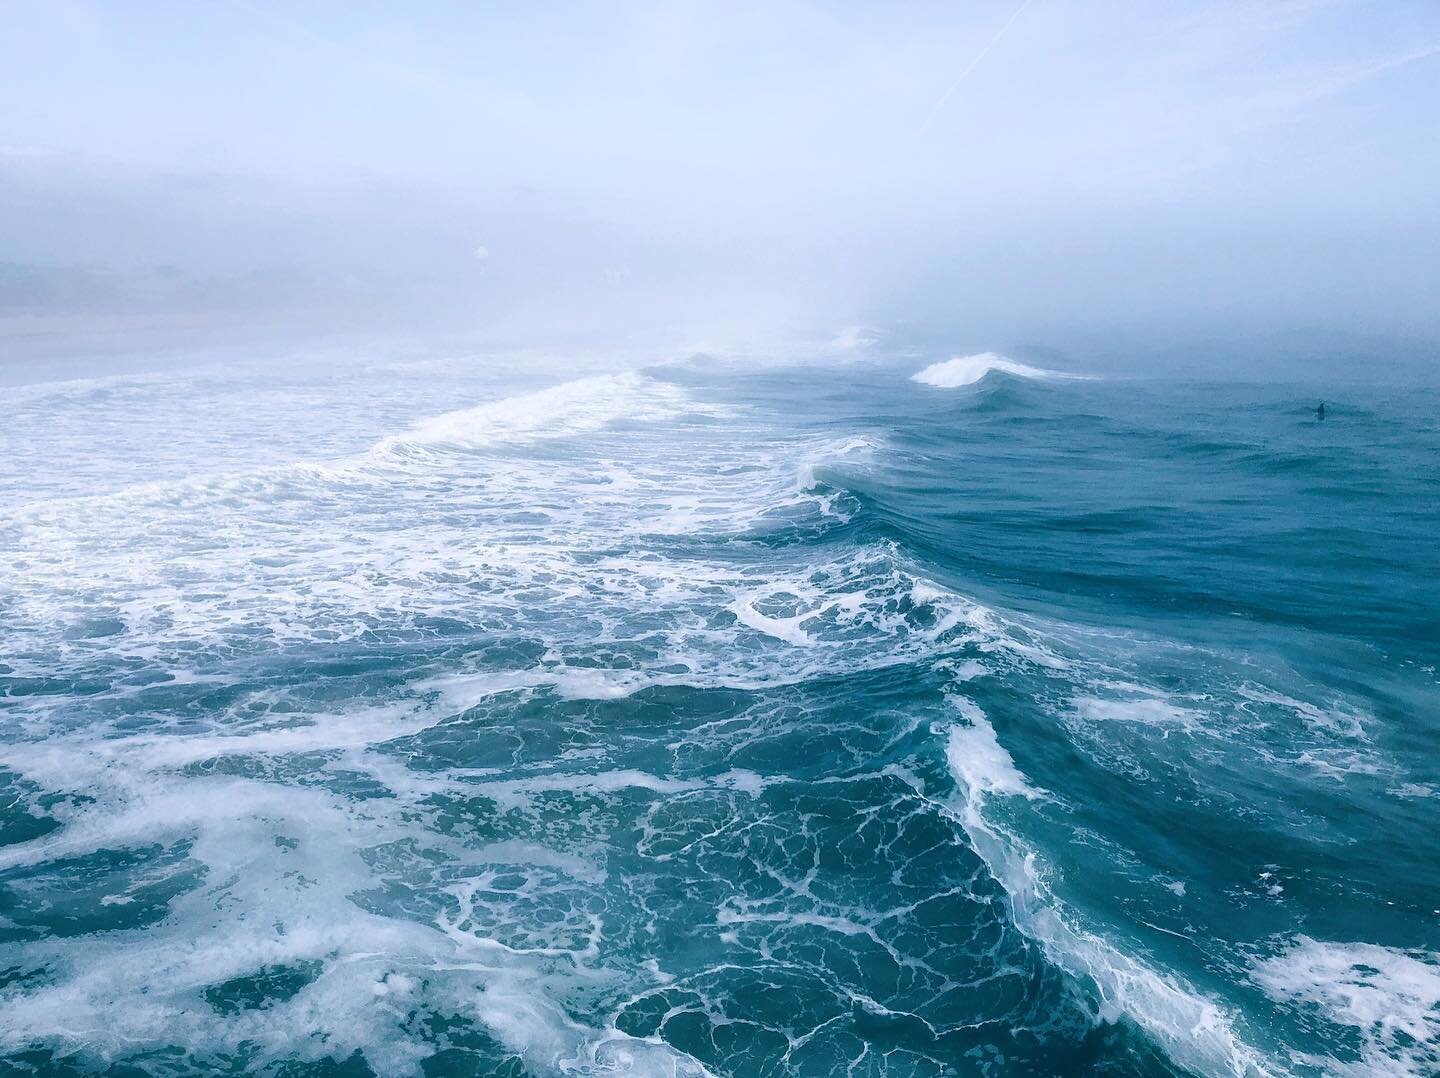 We have approached the United Nations Ocean Decade and are left with 10 years to help &ldquo;reverse&rdquo; the damage of human activity and its influence on climate change. We are declaring an Ocean and Climate emergency!

Climate change has been re